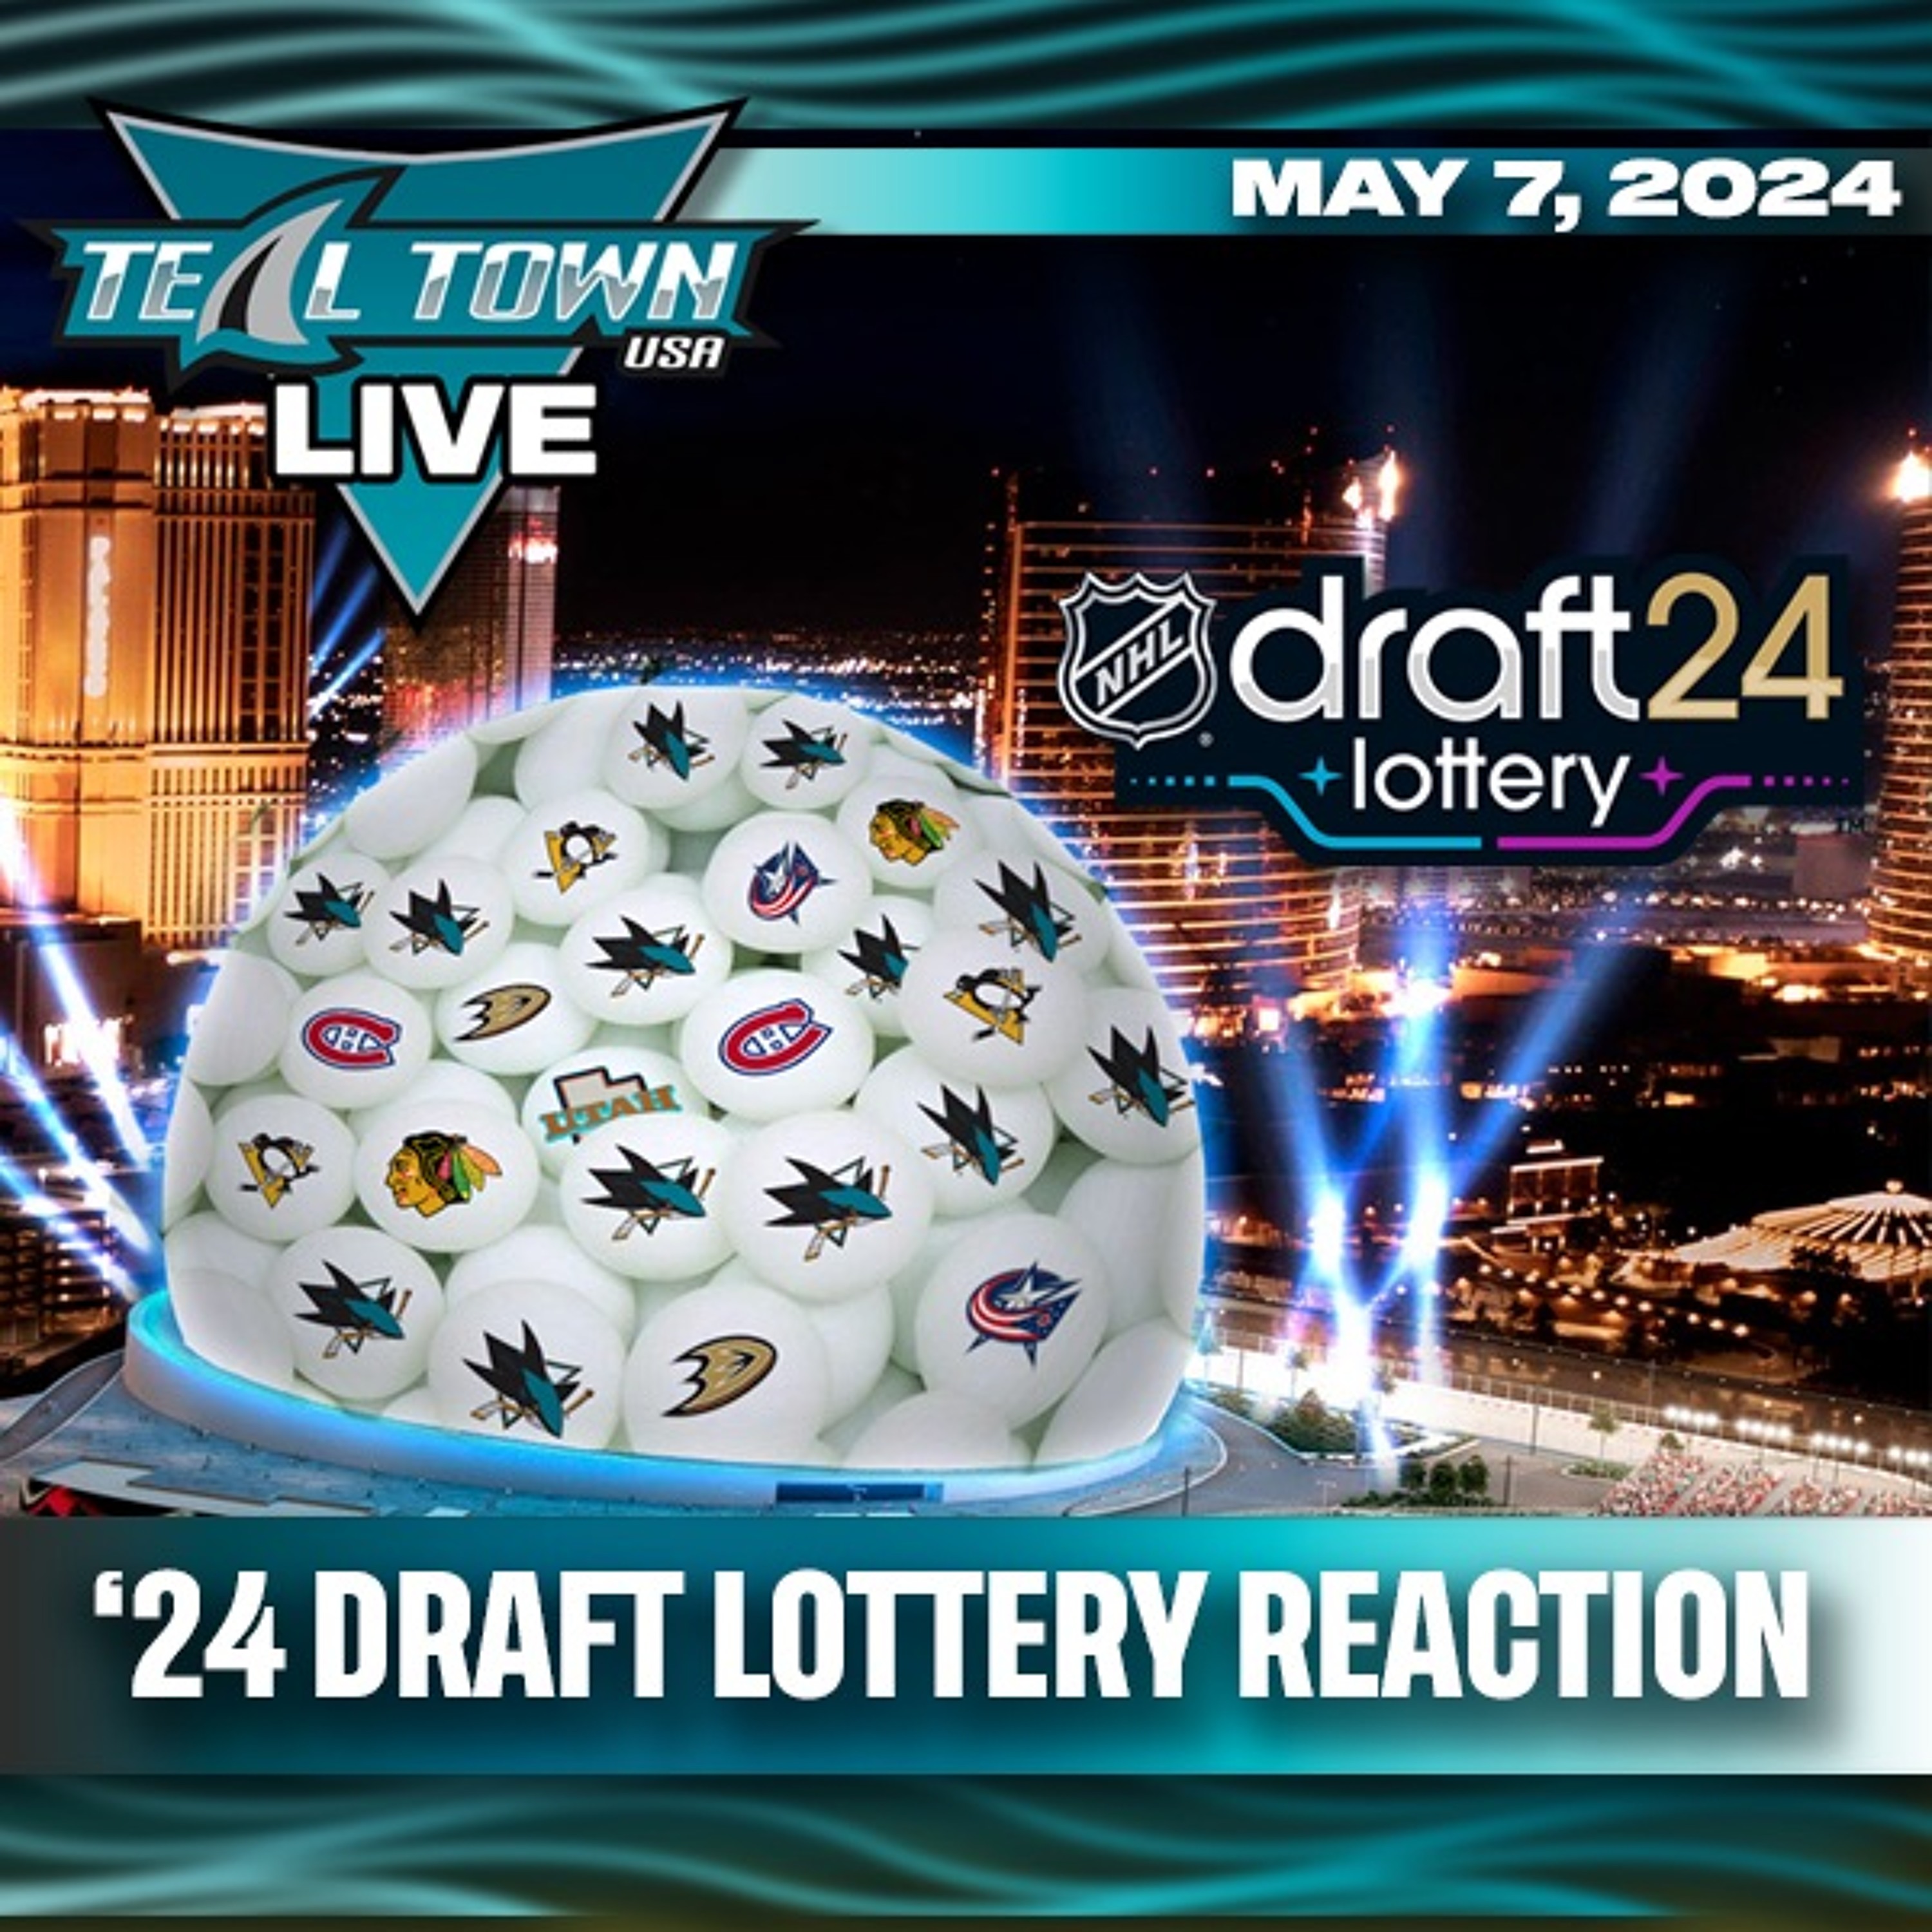 2024 NHL Draft Lottery Reaction, Sharks Win 1st Overall - 5/7/2024 - Teal Town USA Live